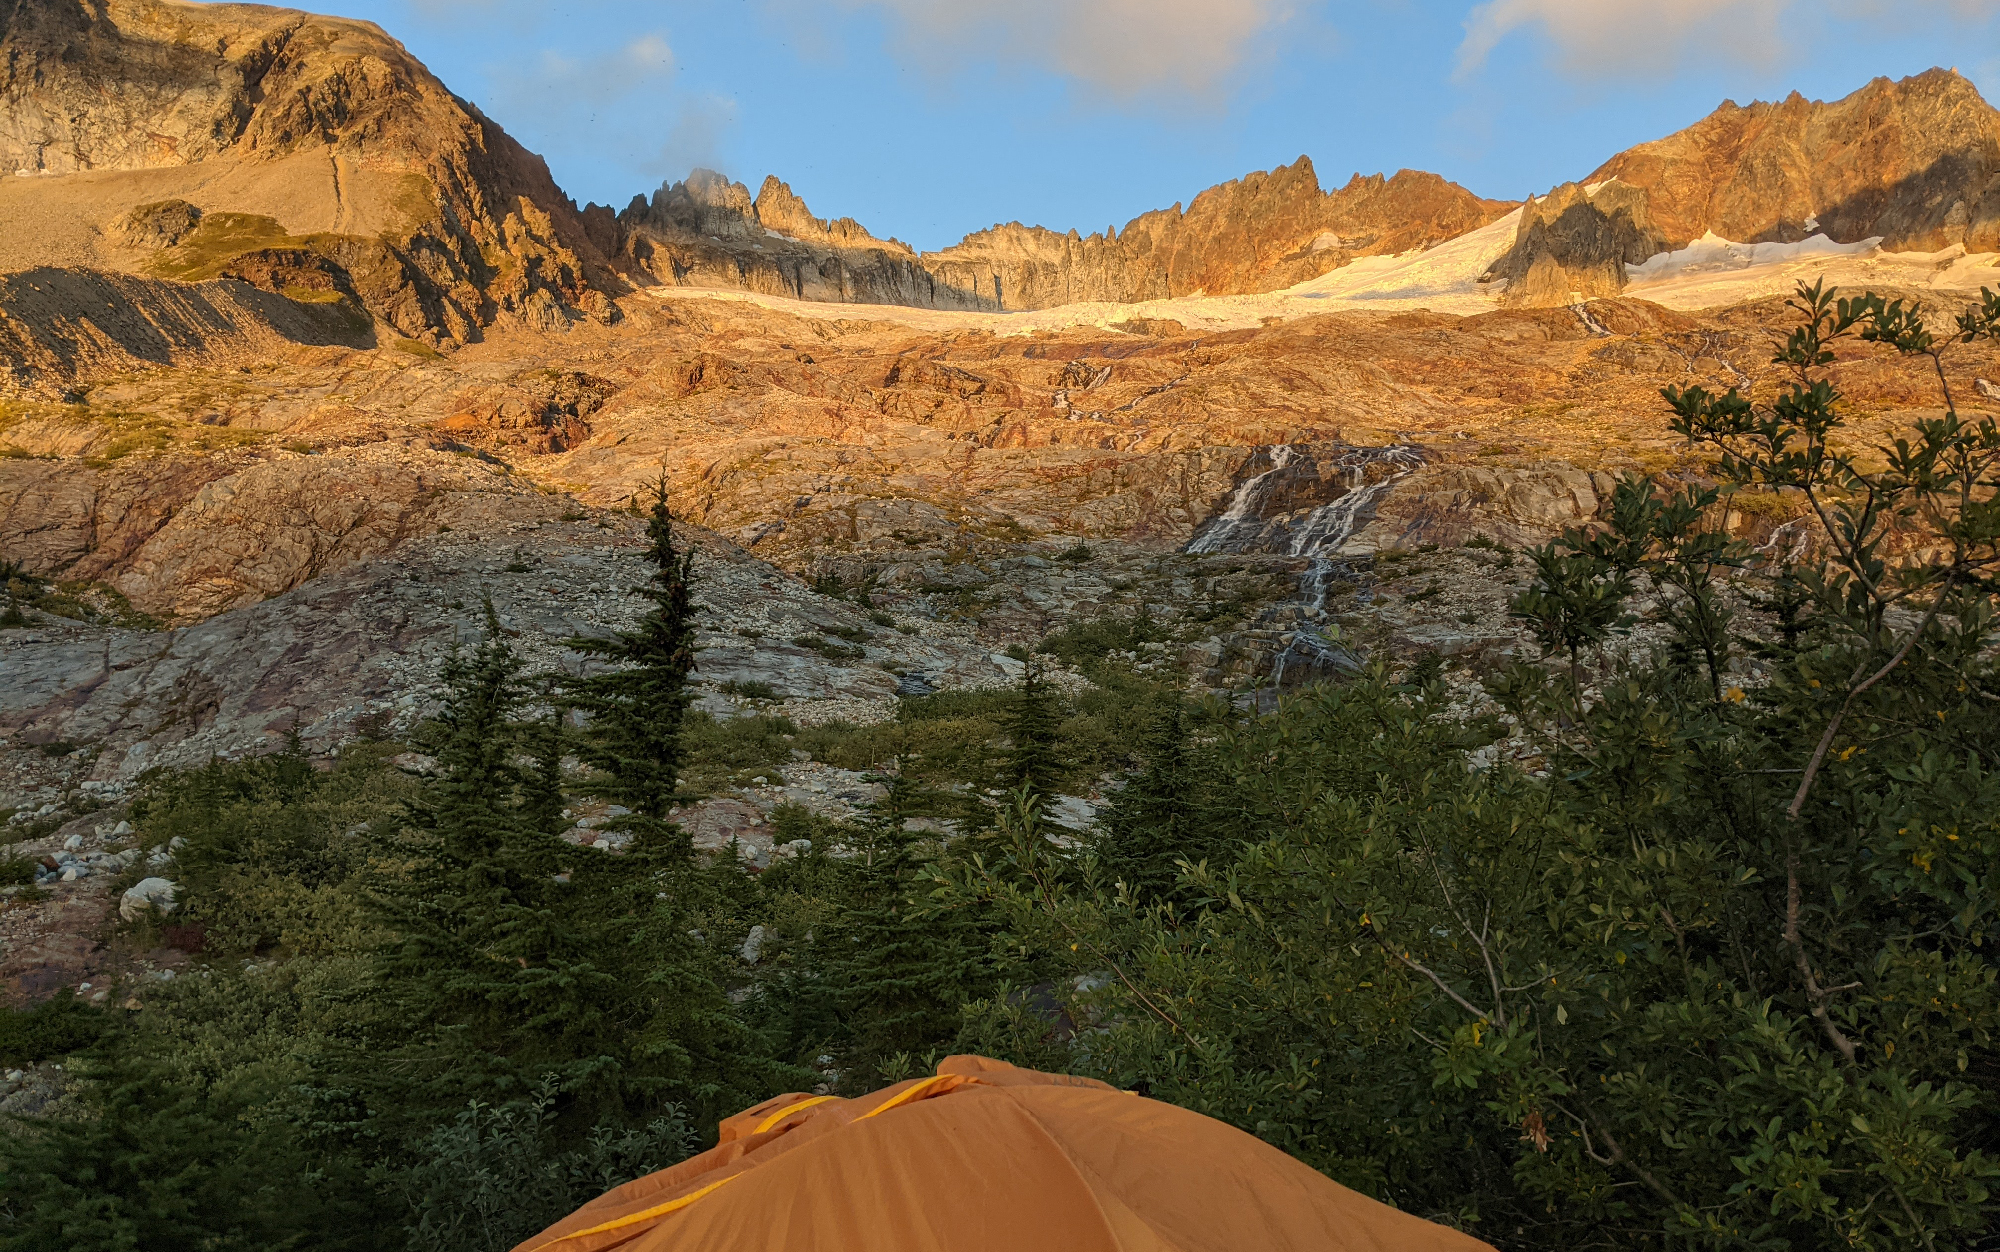 View of Tent with Sahale Peak in the Background